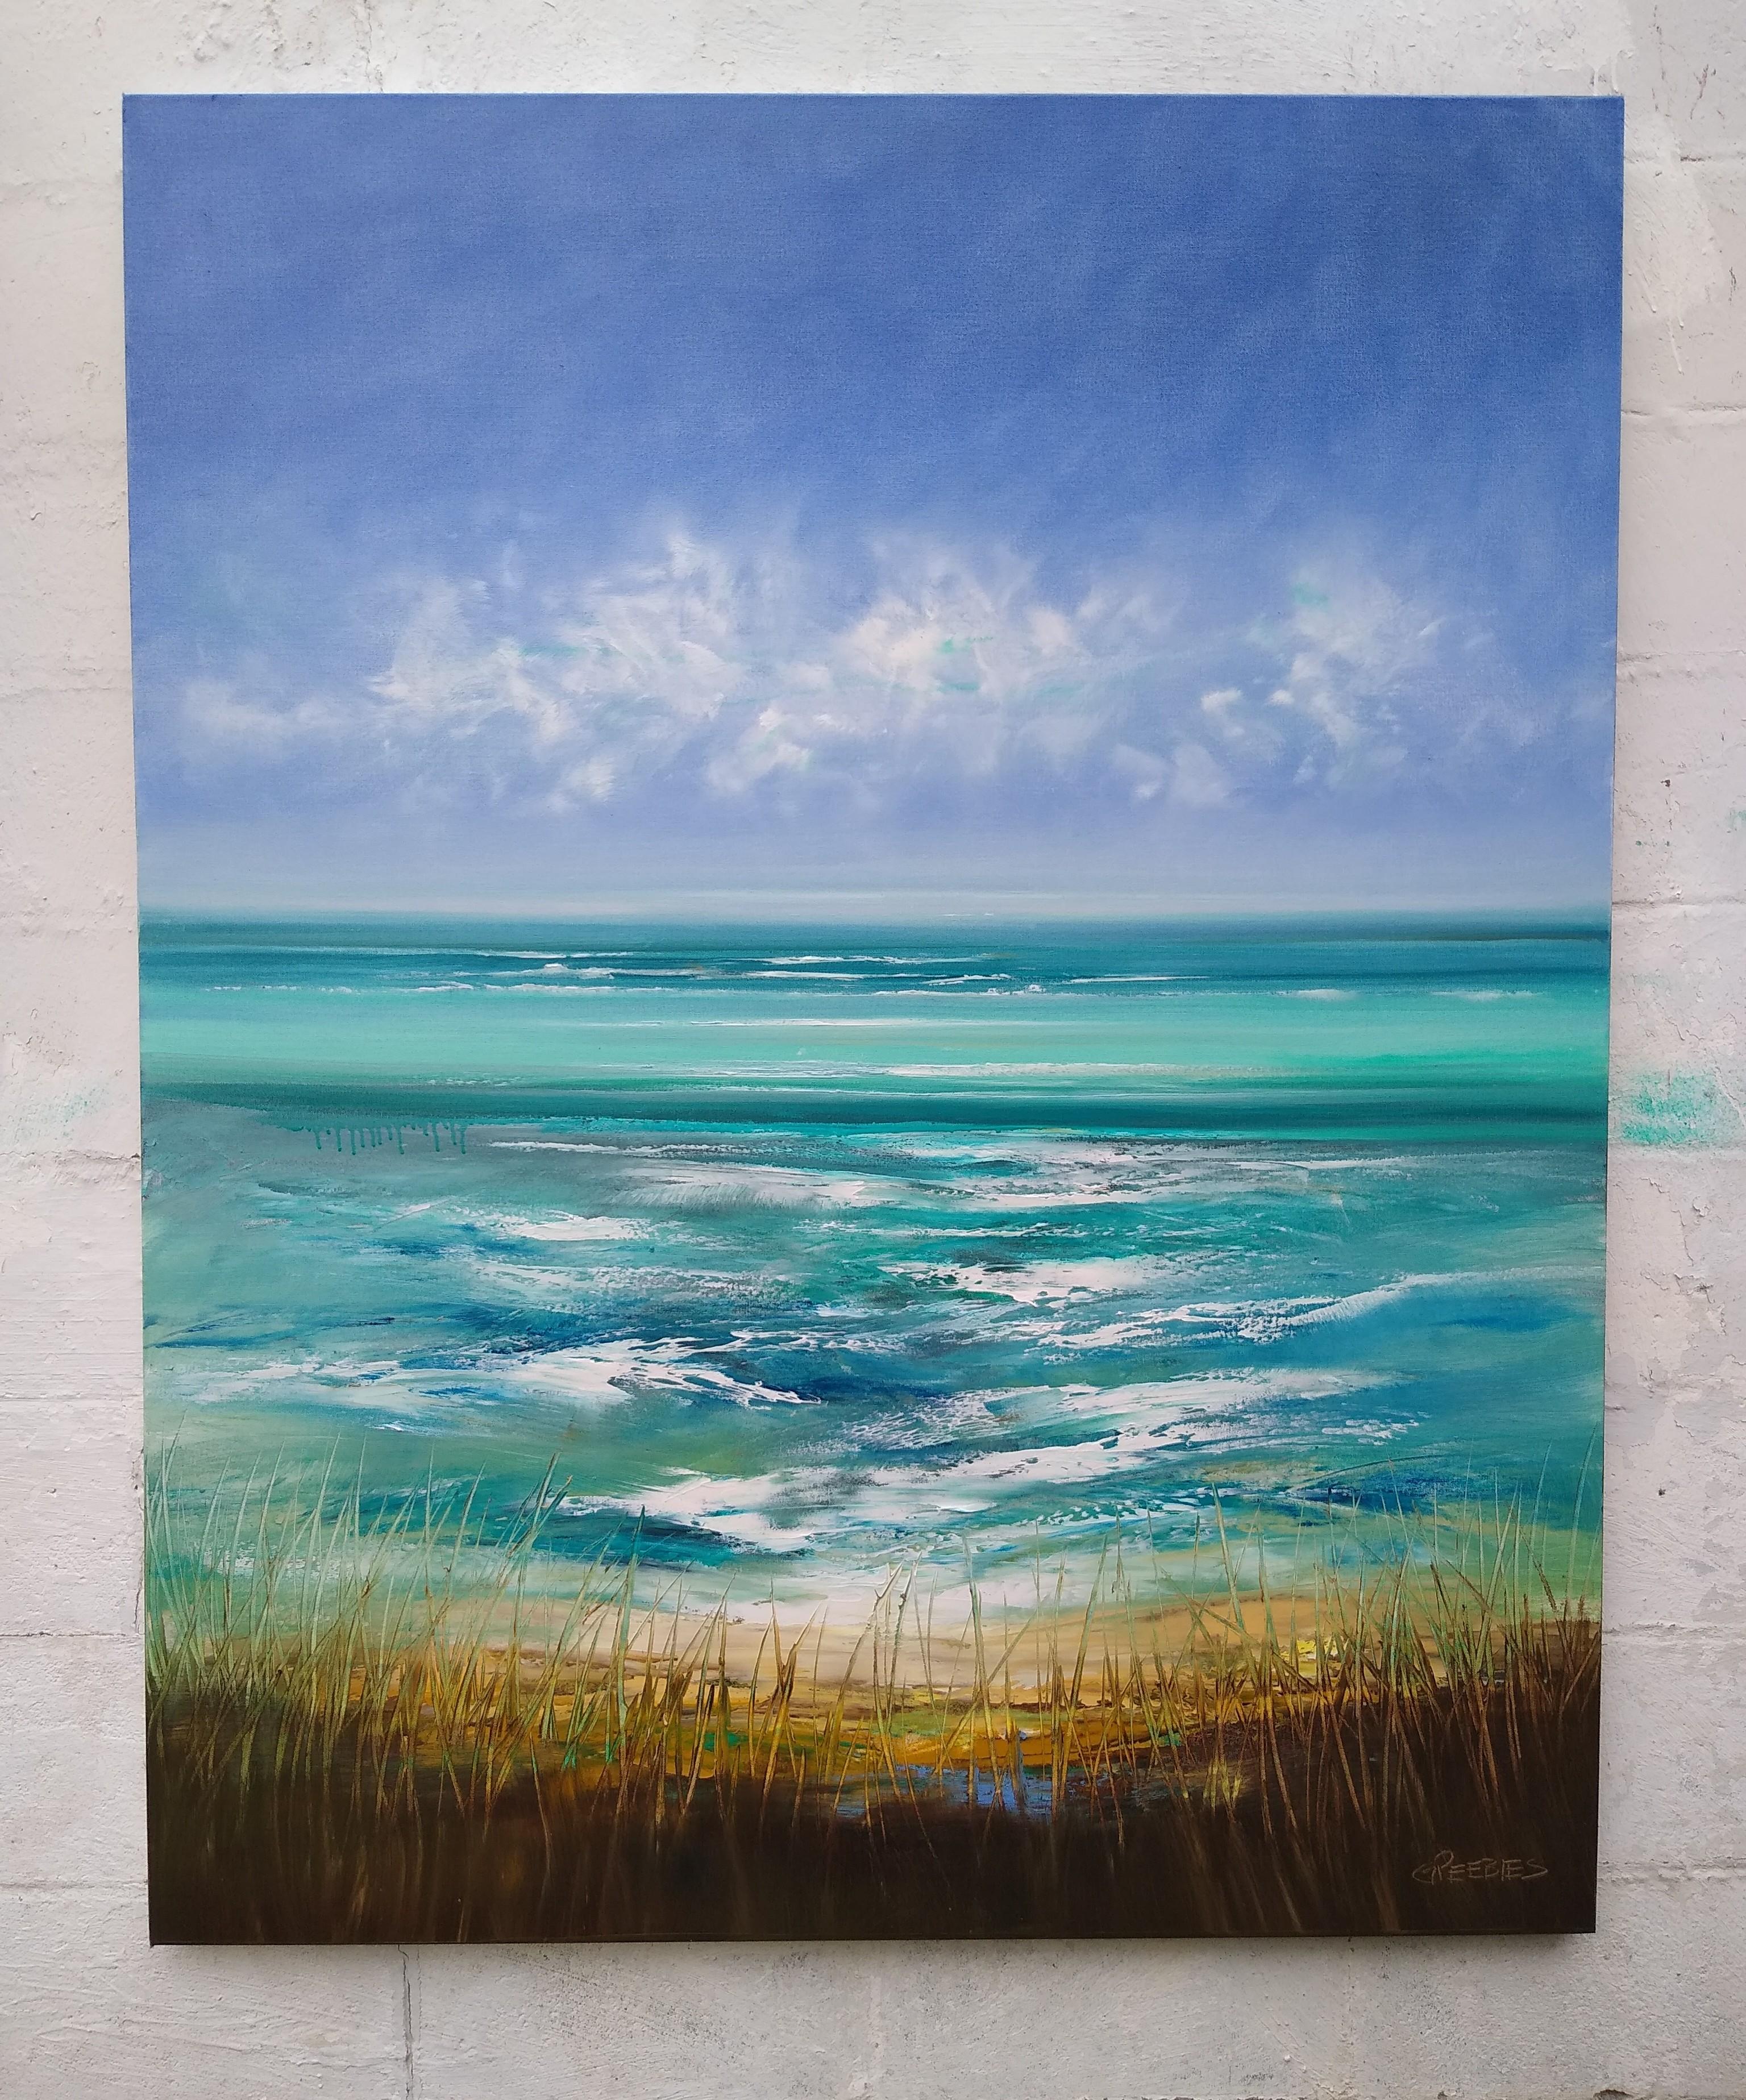 <p>Artist Comments<br />Created with palette knives and paintbrushes, artist George Peebles reveals a view of the vast sea from the shore. Standing on a sandy dune with tall grass, the cool turquoise waters dramatically stretch to the horizon. Soft